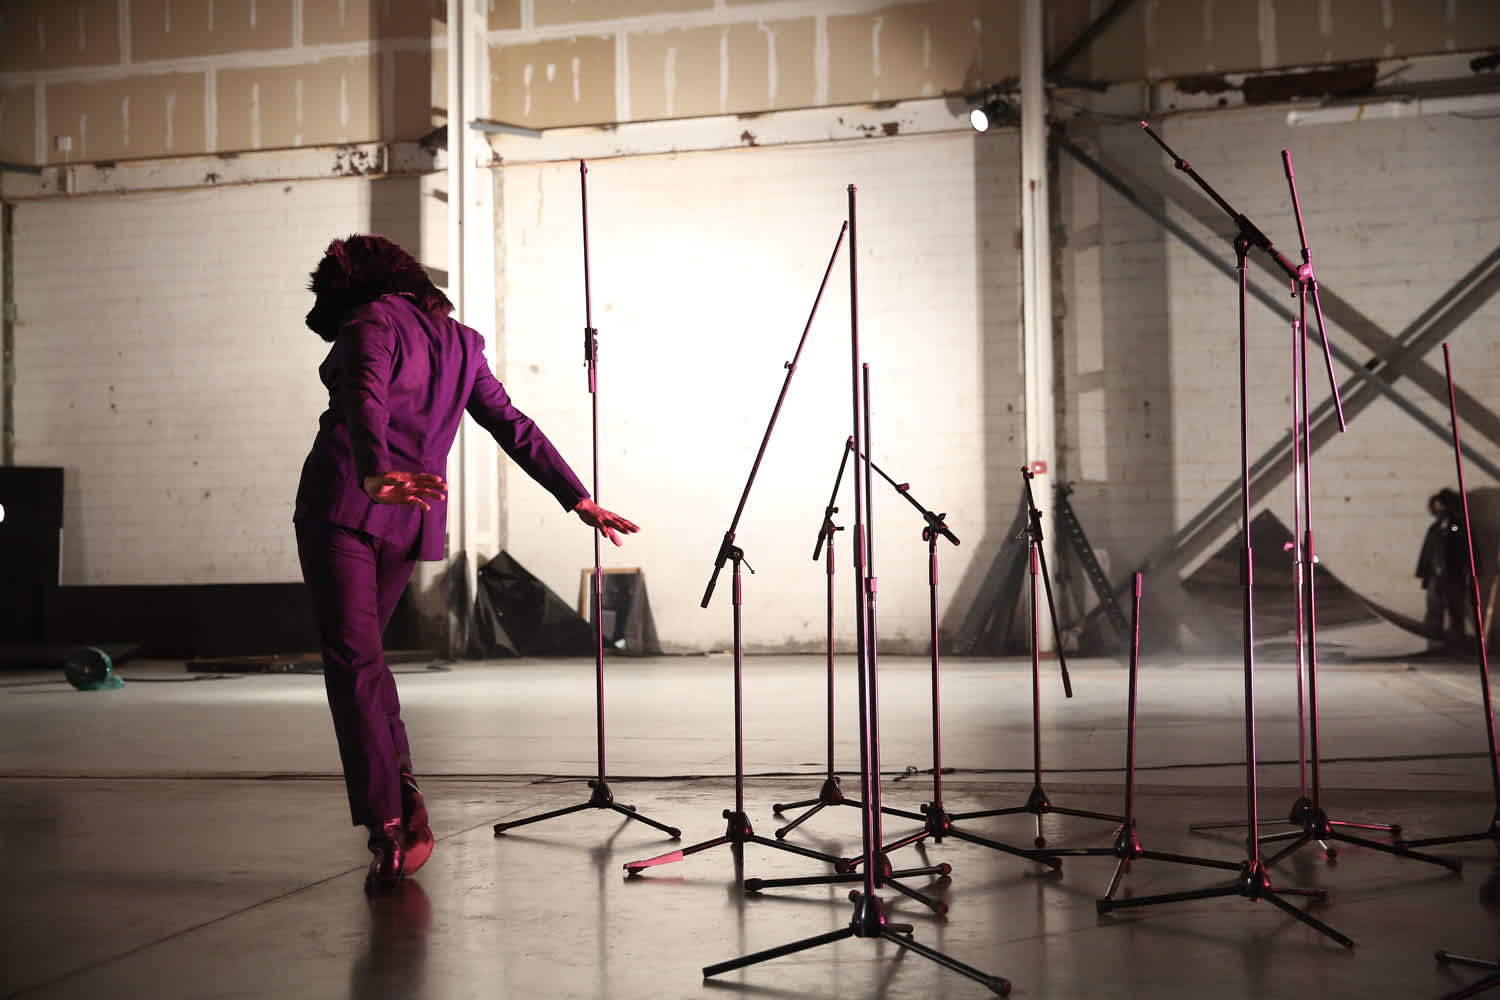 In a warehouse space, a figure in a purple suit and wearing a wolf mask faces away from the camera with their arms reaching behind them. To the right, there is a group of mic stands. 